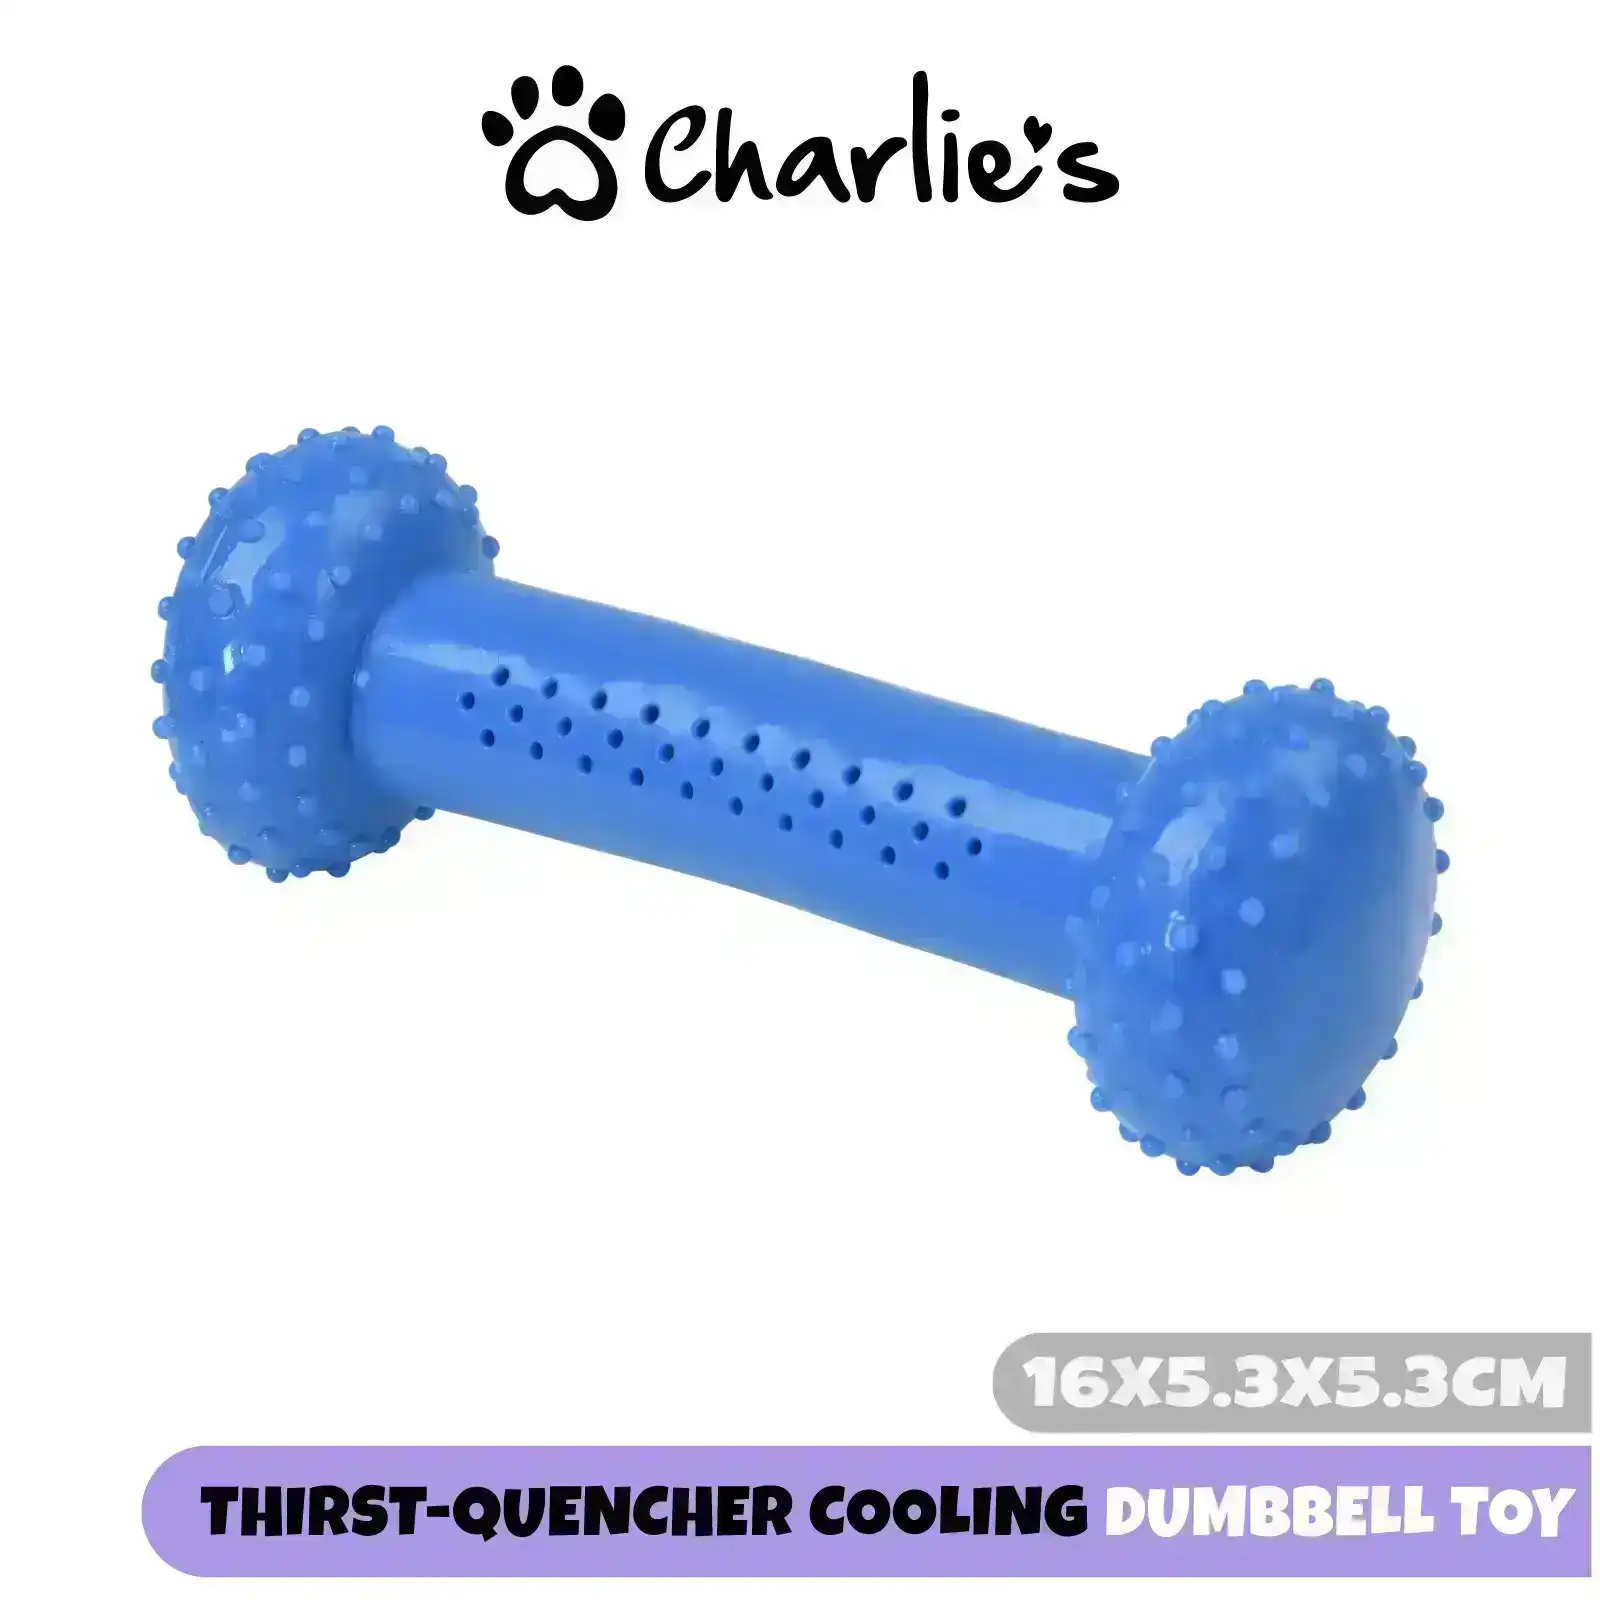 Charlie's Thirst-Quencher Cooling Dumbbell Toy Blue 16x5.3x5.3cm